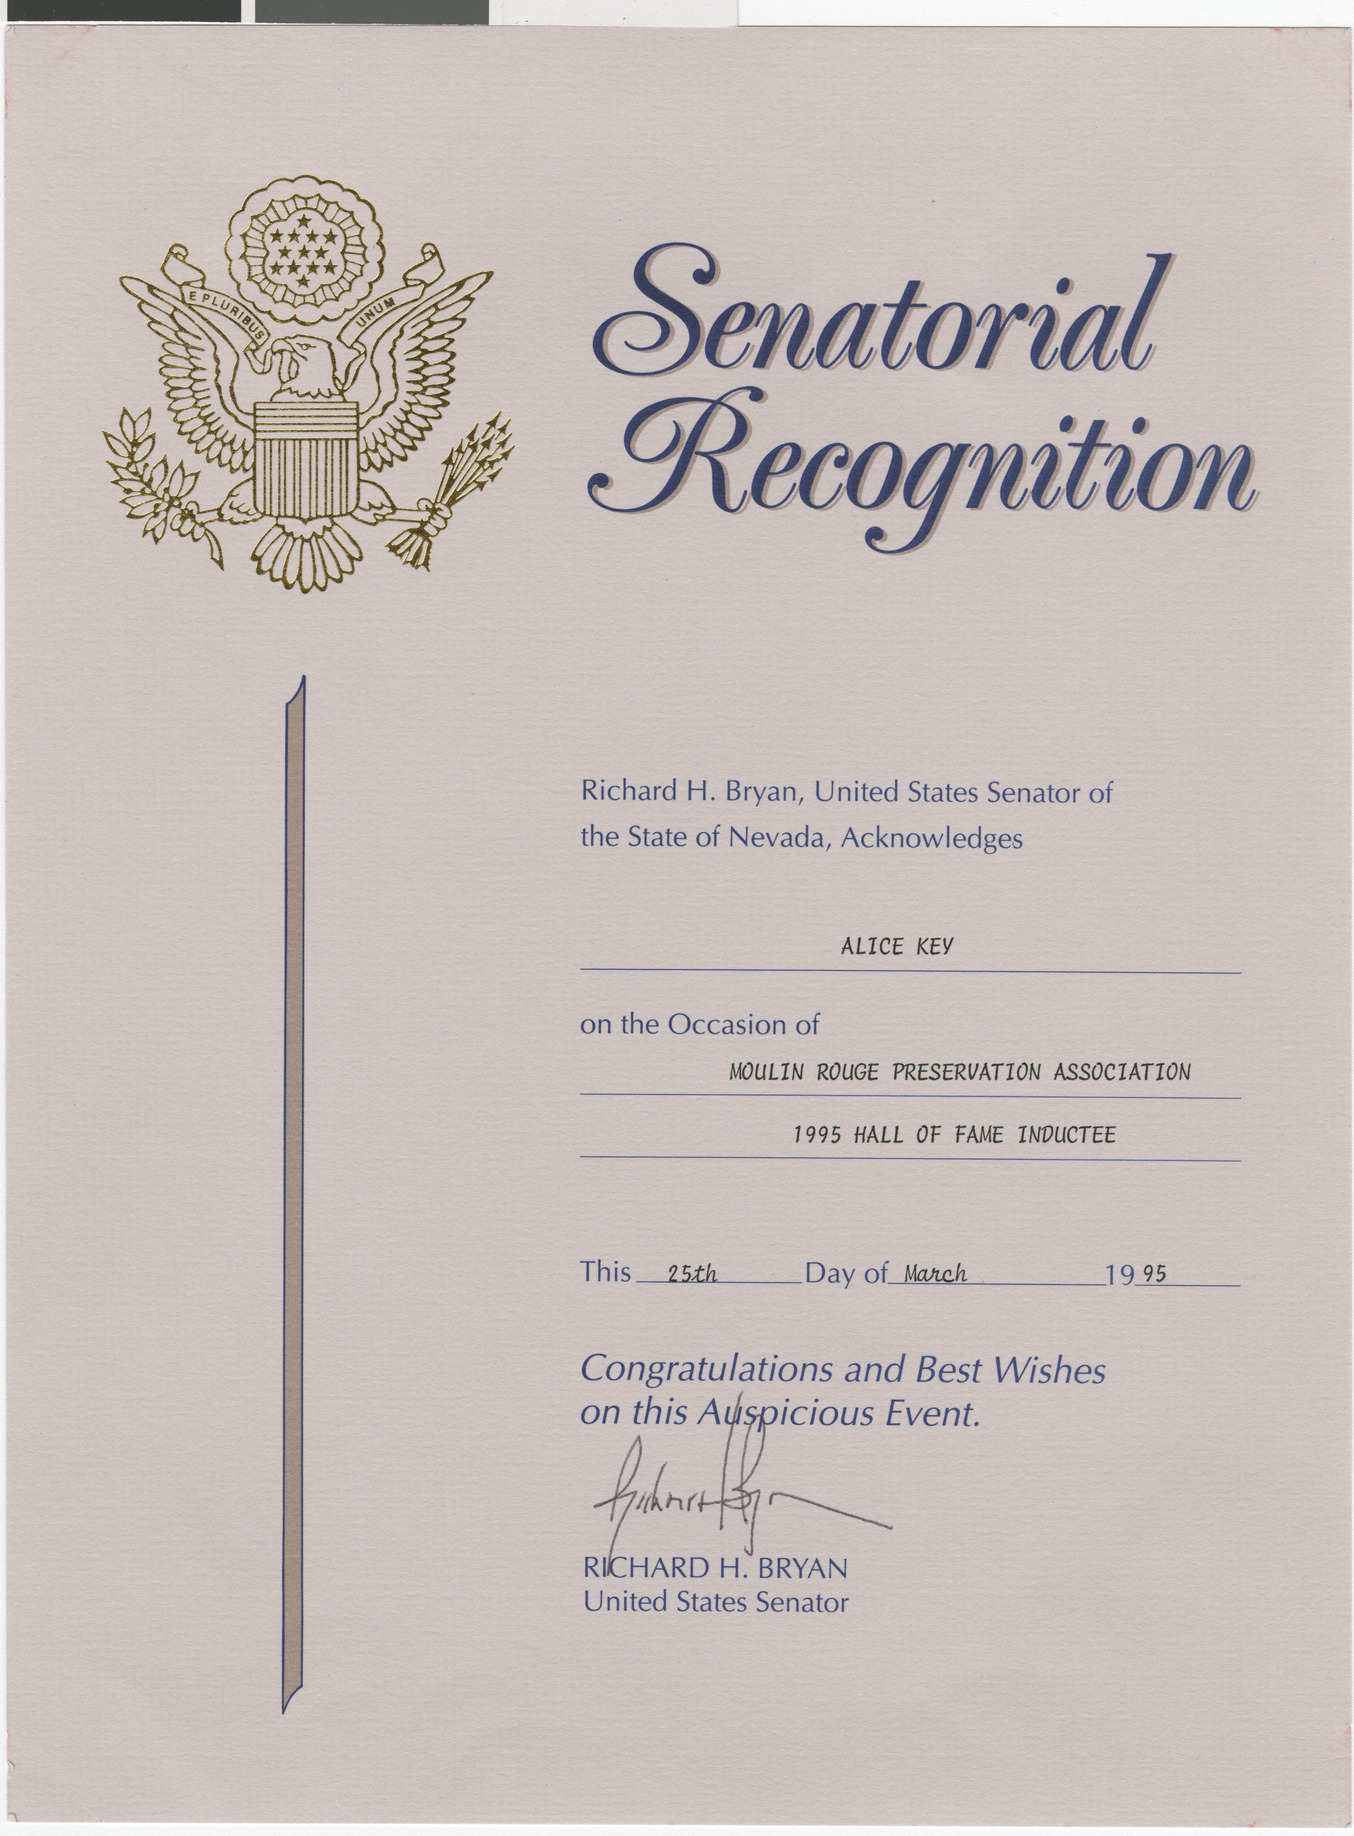 Senatorial Recognition from Richard H. Bryan to Alice Key on the Moulin Rouge Preservation Association 1995 Hall of Fame induction, March 25, 1995